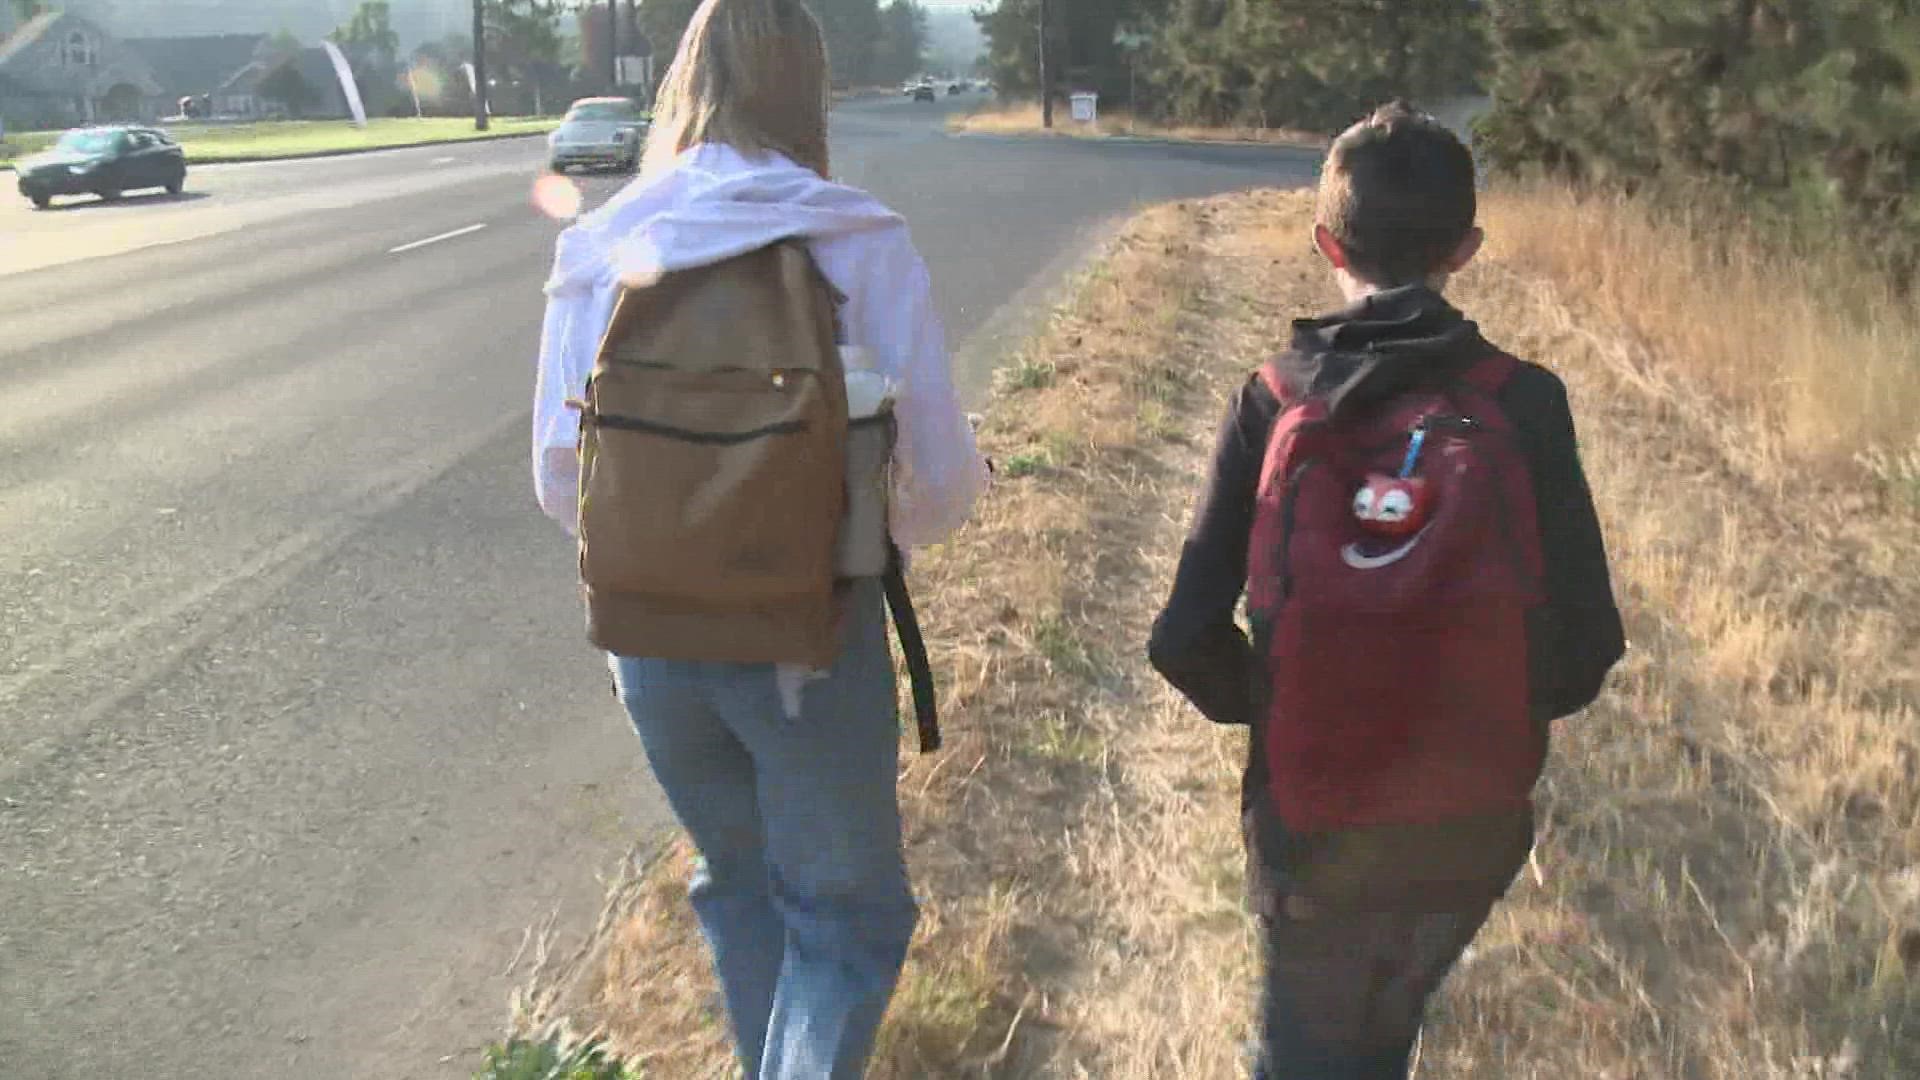 Our KREM 2 reporter had the opportunity to walked with one of the student affected for the bus shortage, who has to walk more than two miles to arrive to the school.